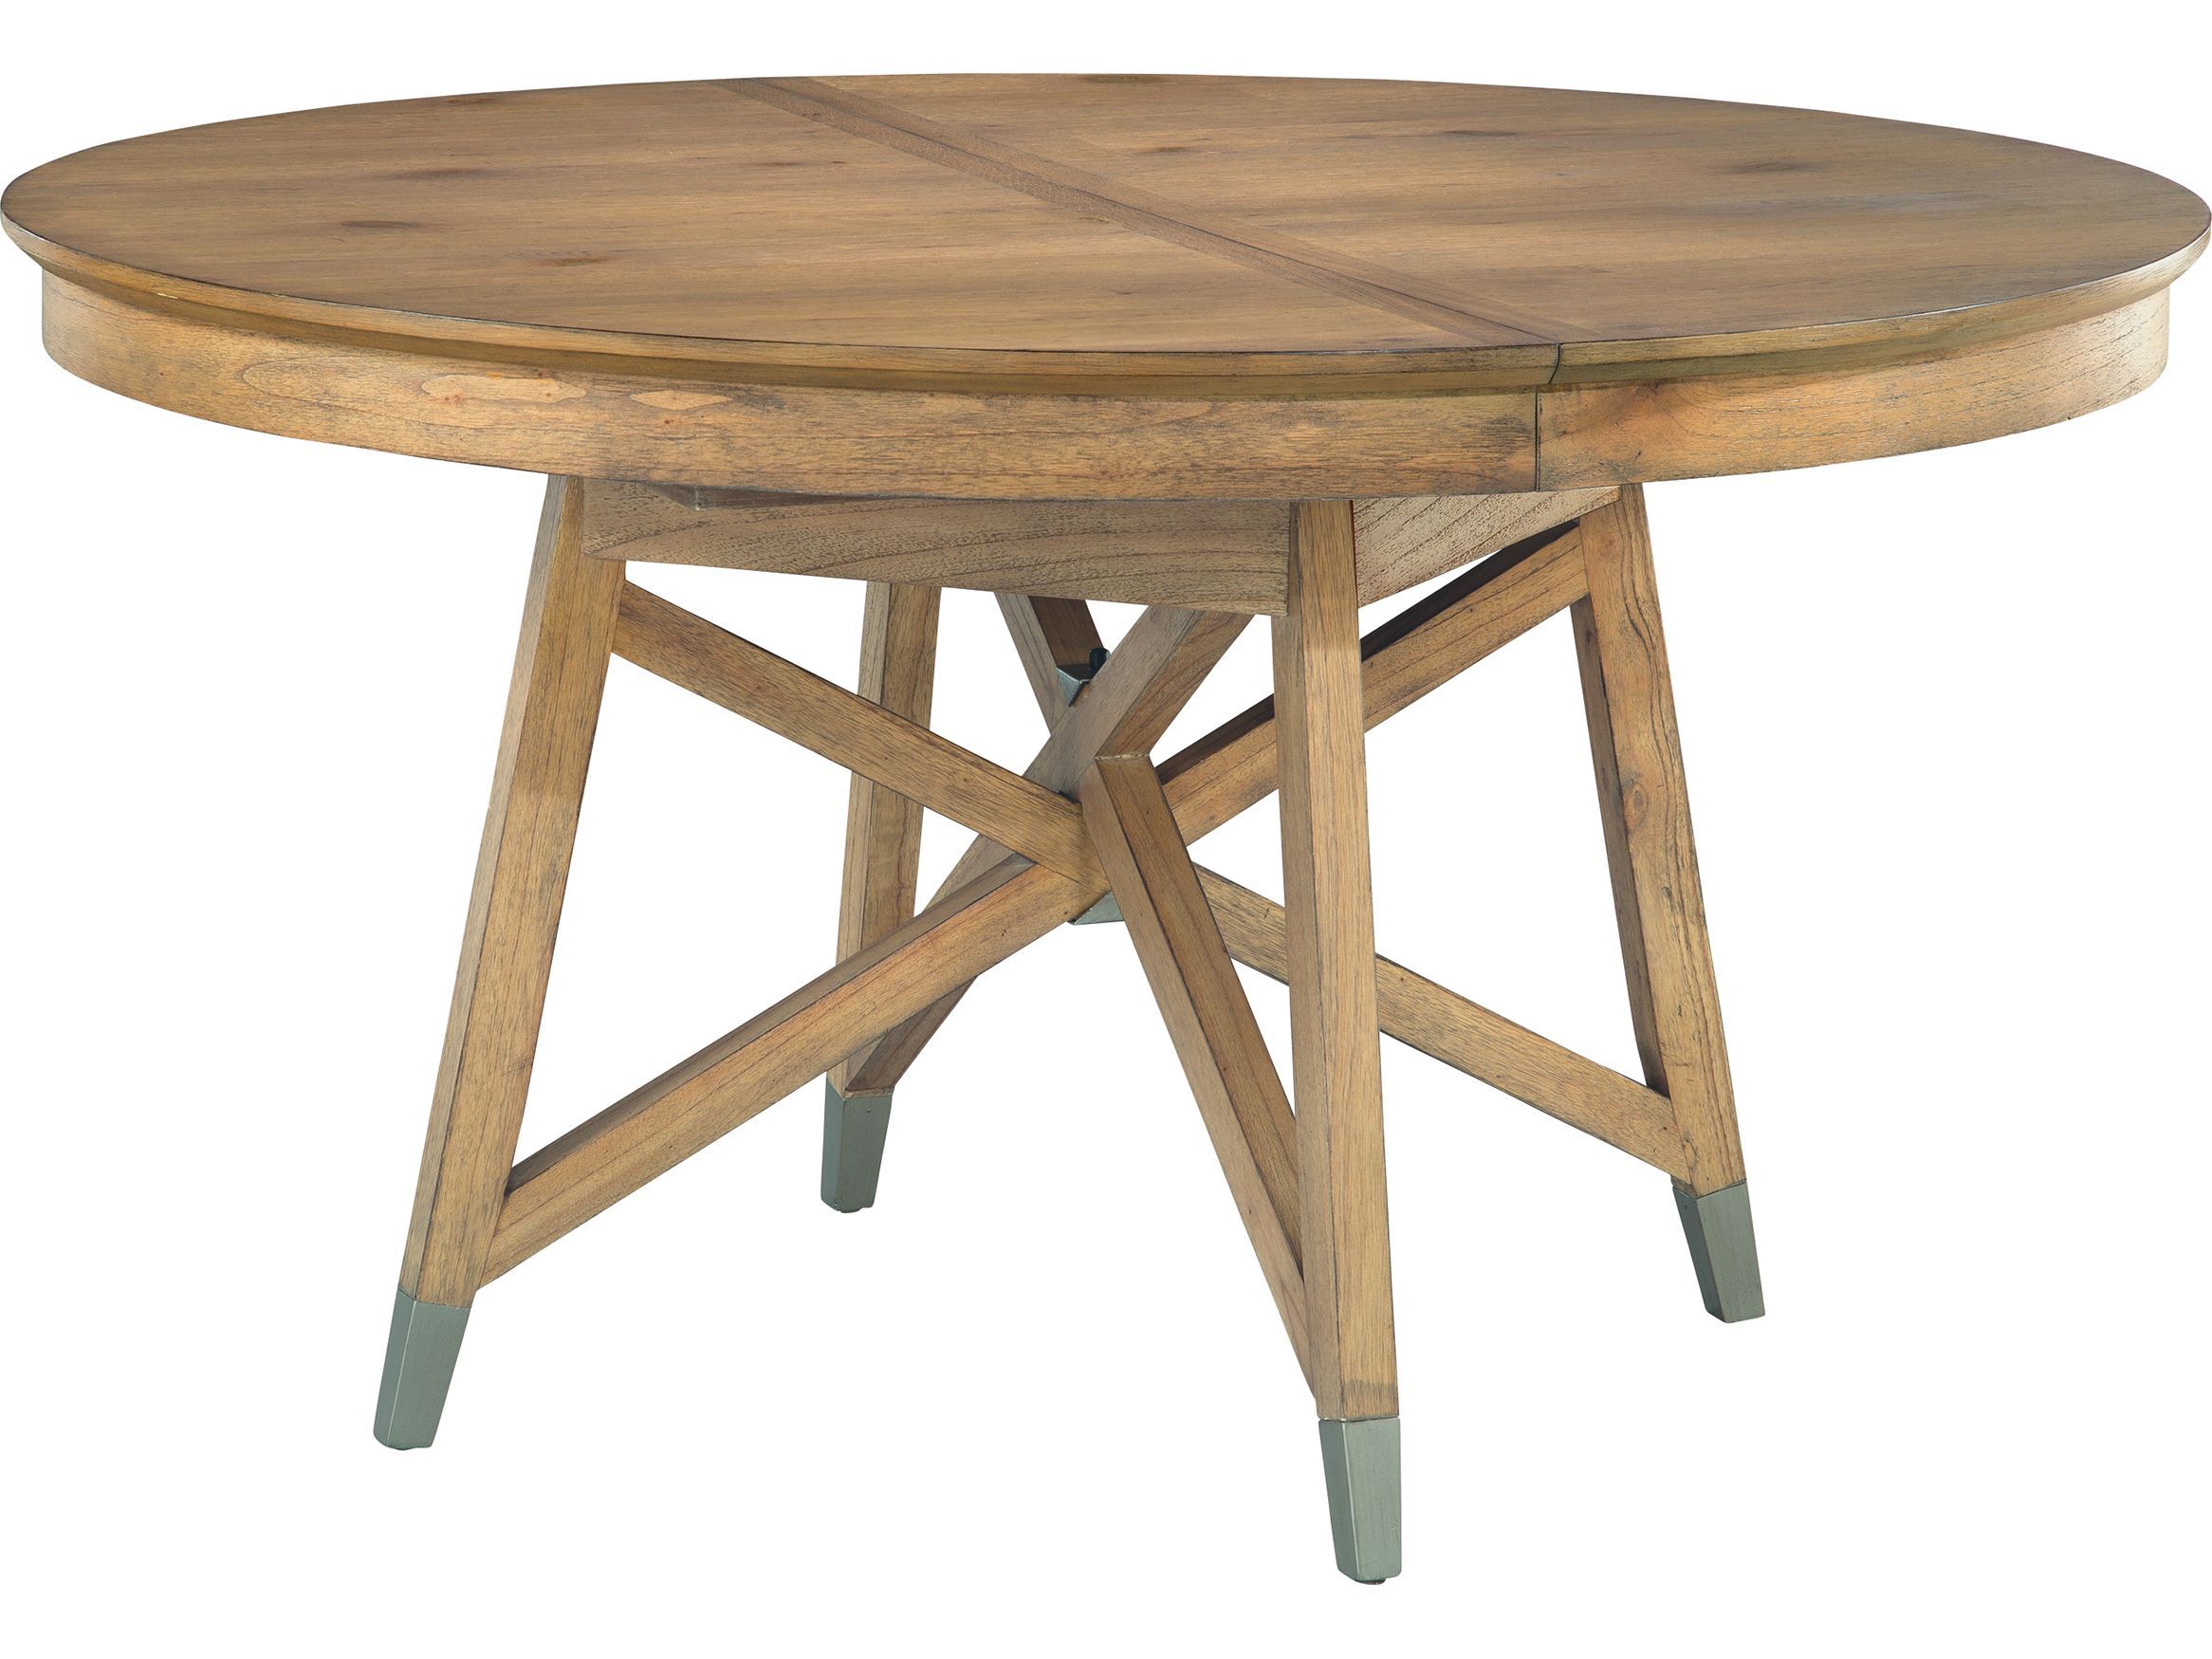 Hekman Avery Park 54'' Round Dining Table | Berwick Kitchen With Regard To Most Up To Date Avery Round Dining Tables (View 5 of 25)